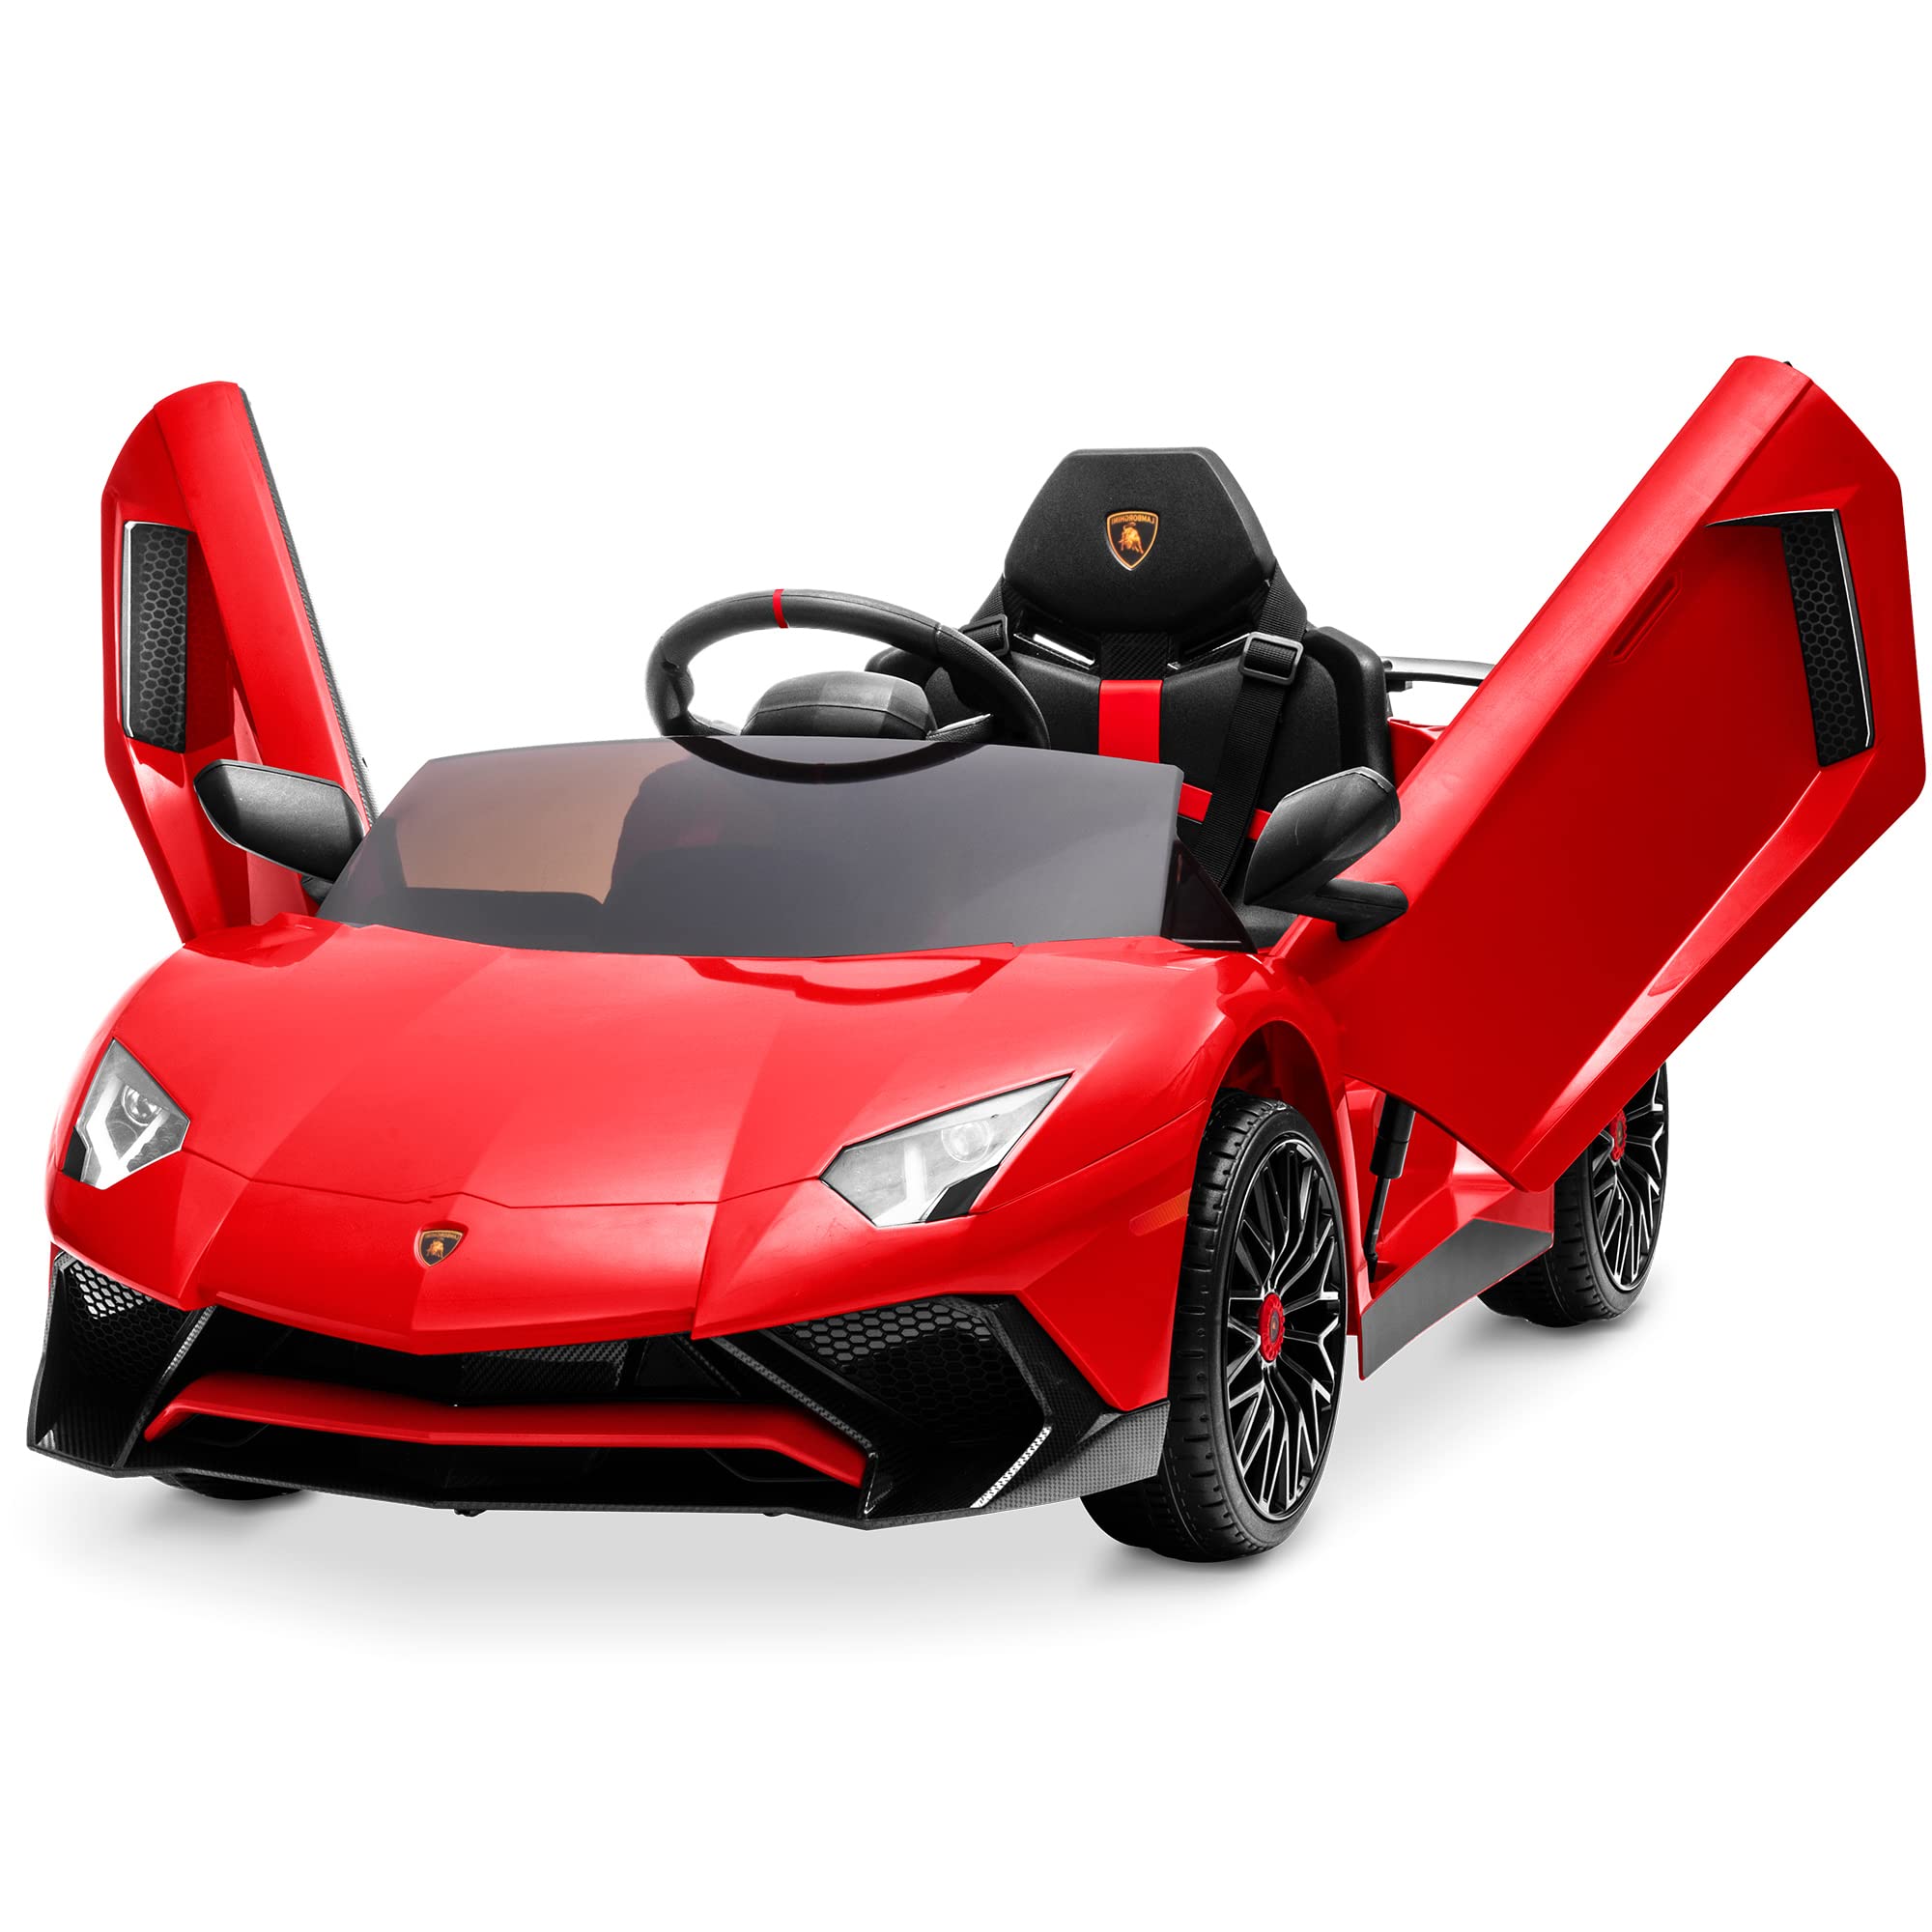 Kidzone Kids Electric Ride On 12V Licensed Lamborghini Aventador Battery Powered Sports Car Toy with 2 Speeds, Parent Control, Sound System, LED Headlights & Hydraulic Doors - Red